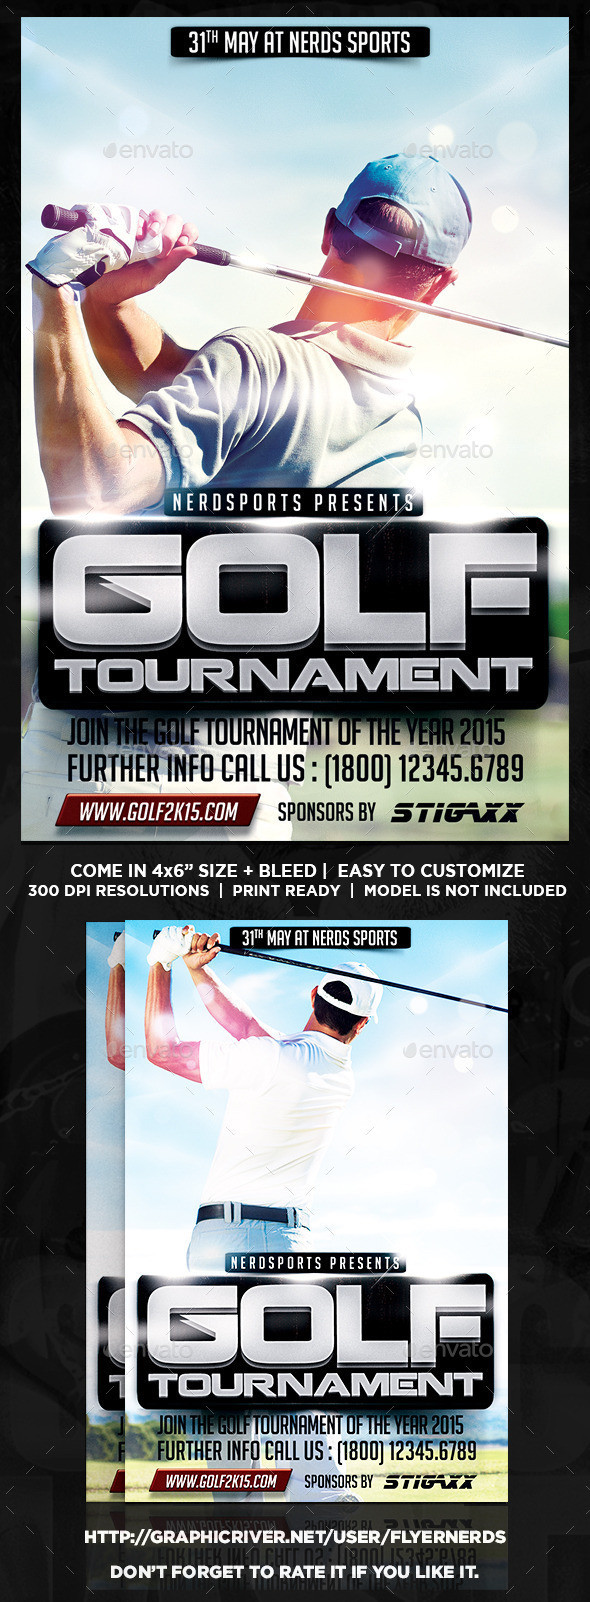 Golf 20tournament 20sports 20flyer 20preview